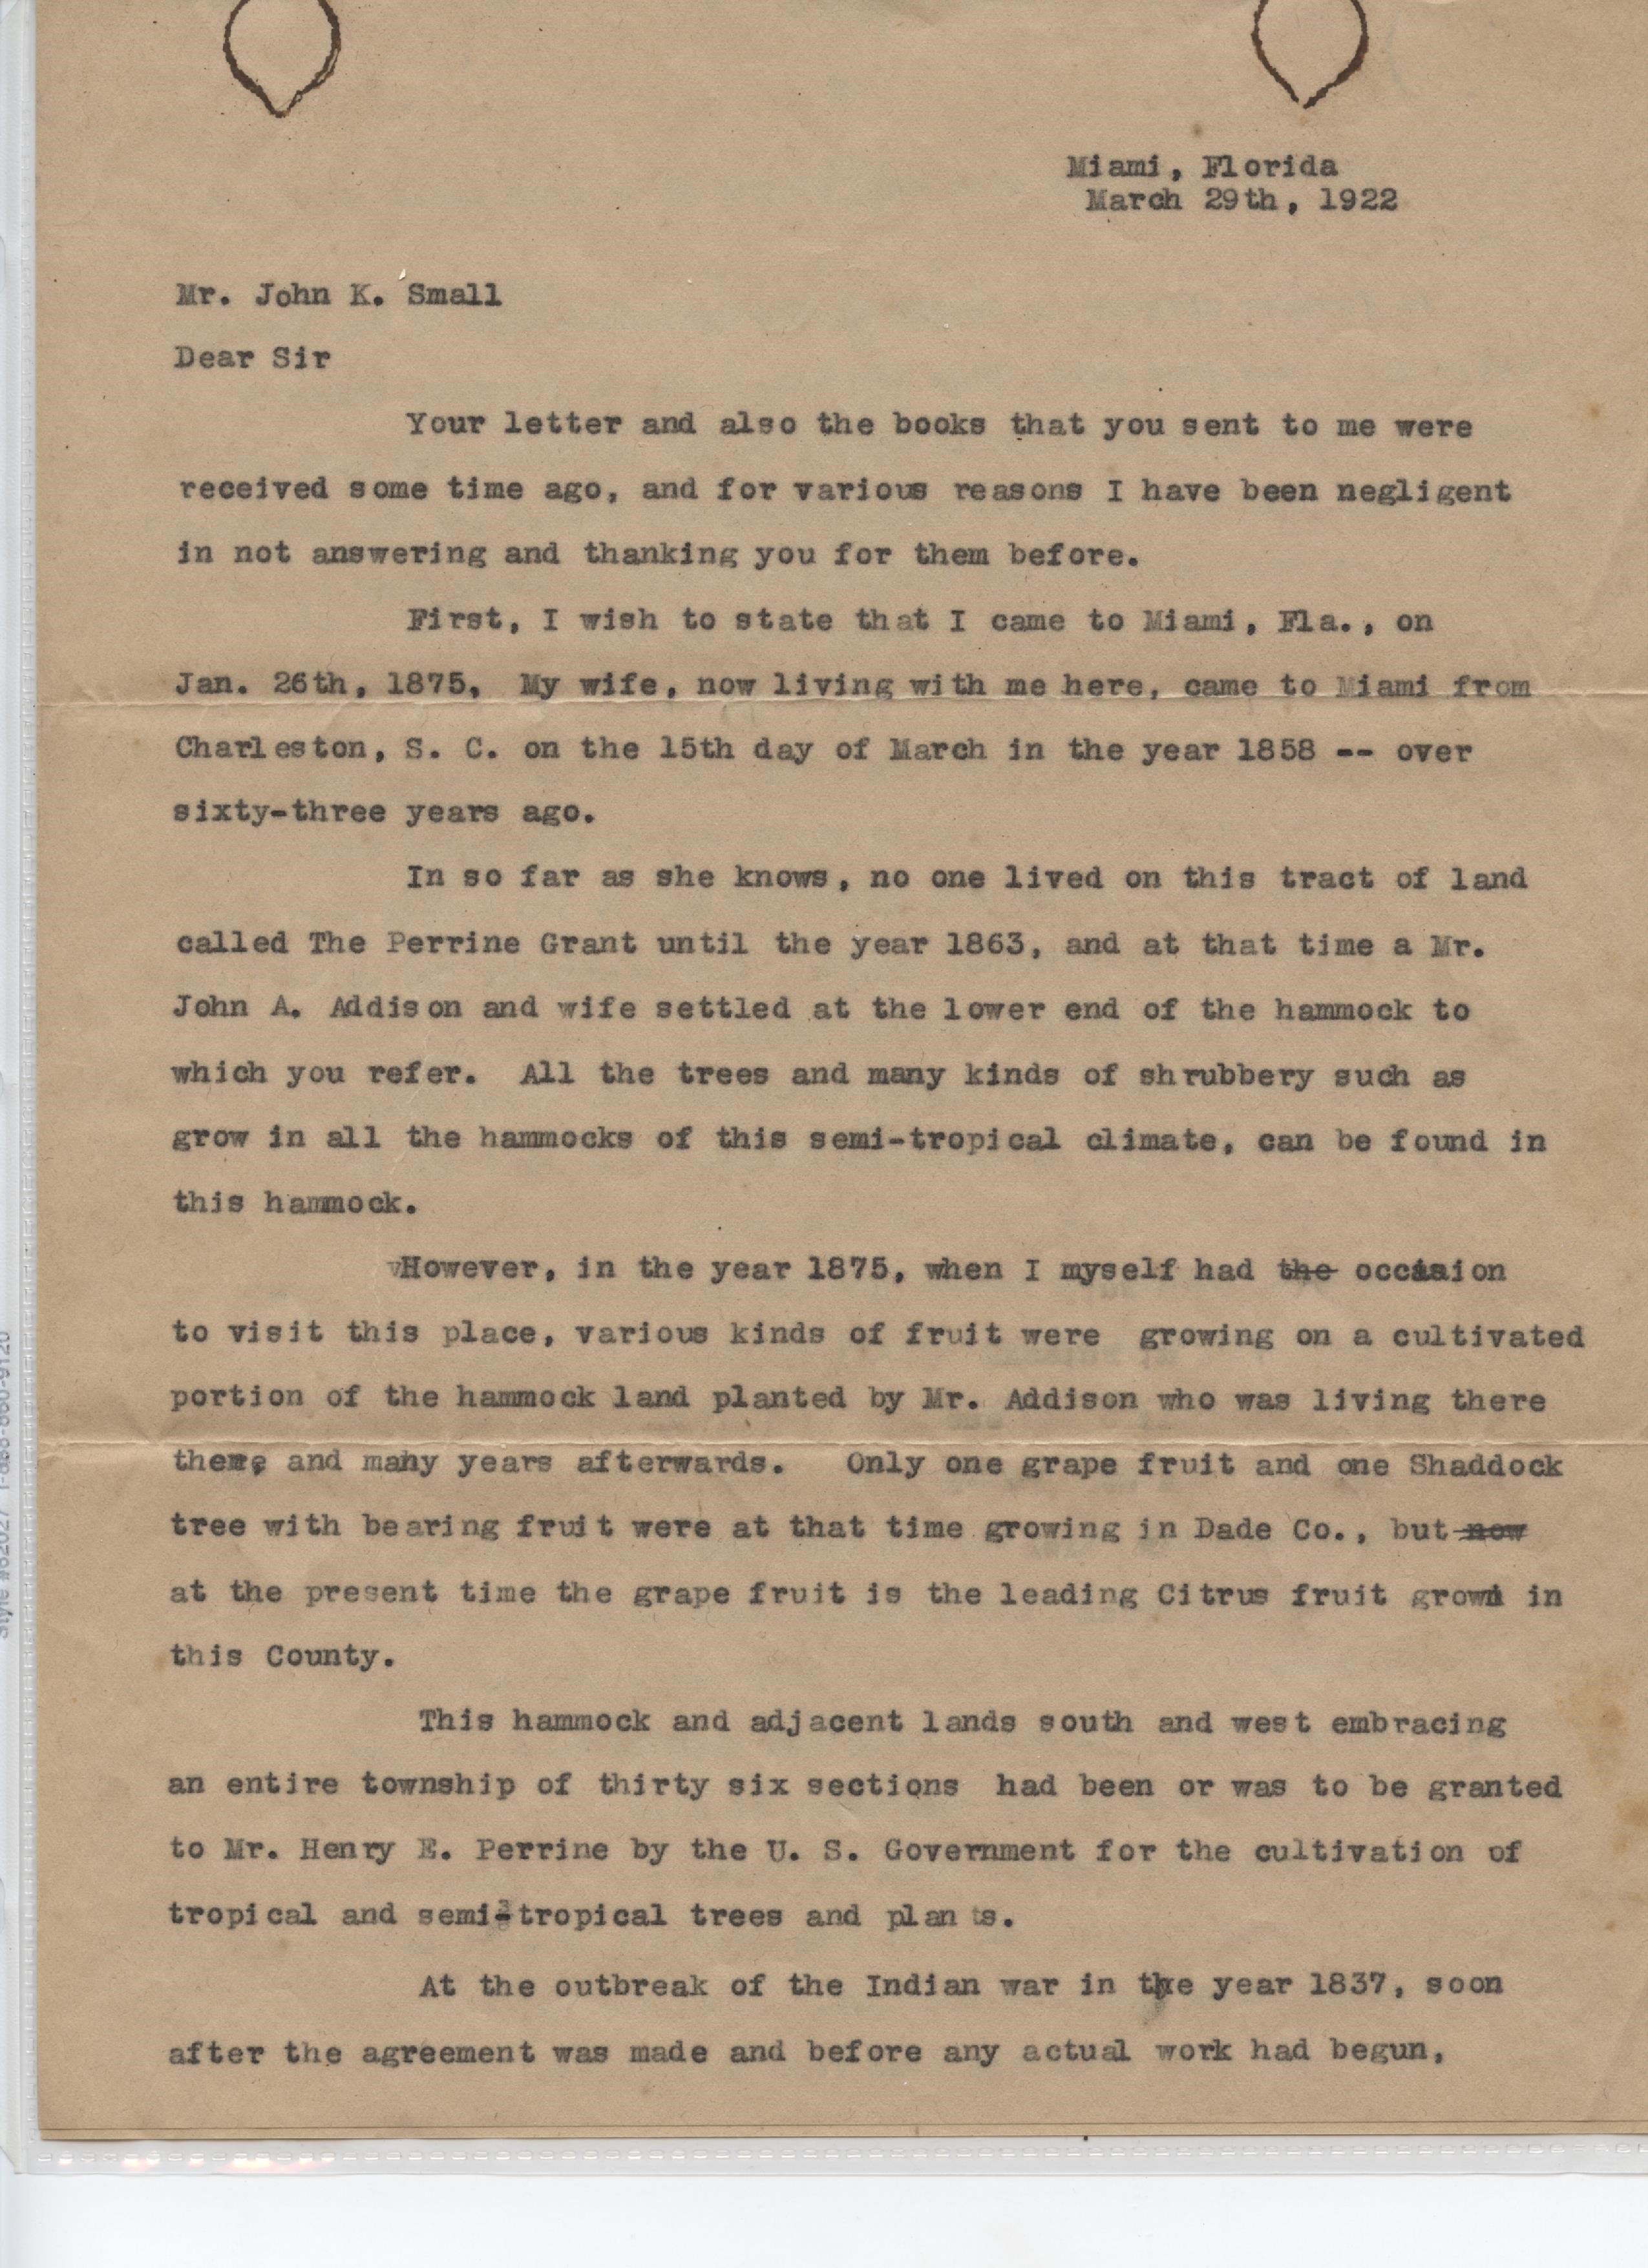 Letter written to John Kunkel Small by former Cutler resident A. C. Richards in 1922